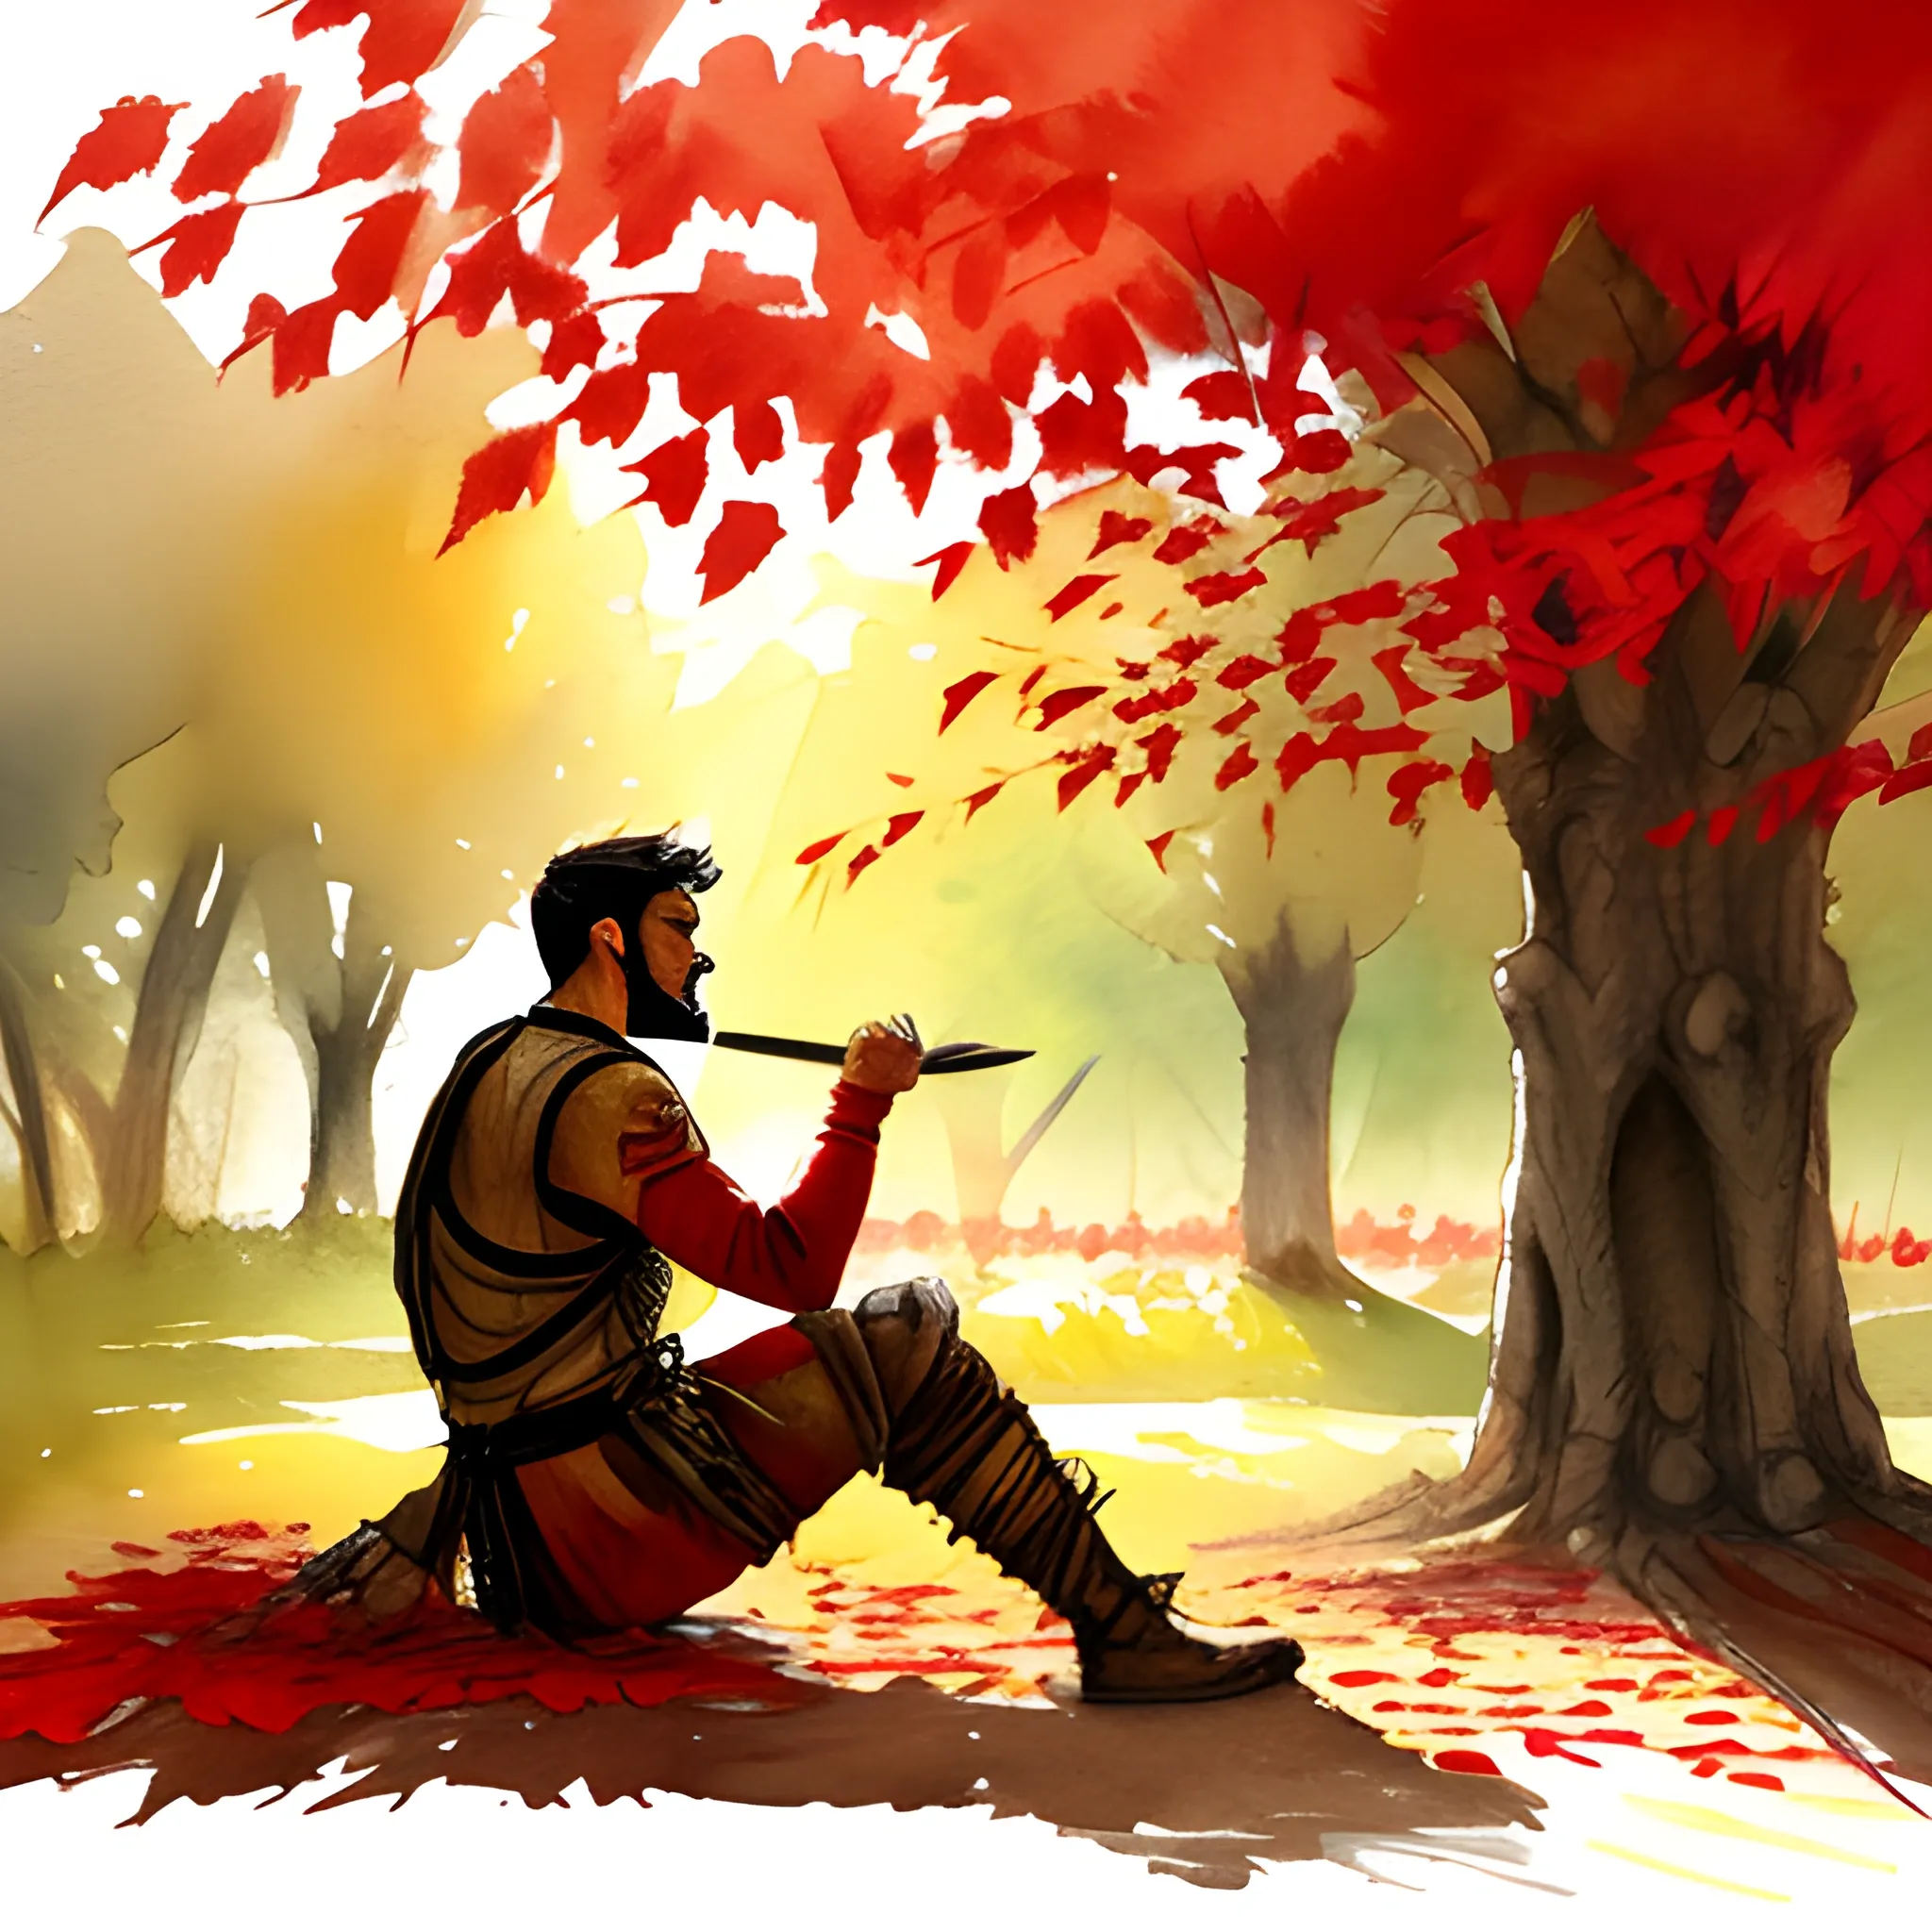  A Warrior sitting under a tree with red leaves a in a warzone facing towards setting sun,  breathing his last breath, Water Color, Oil Painting, Pencil Sketch